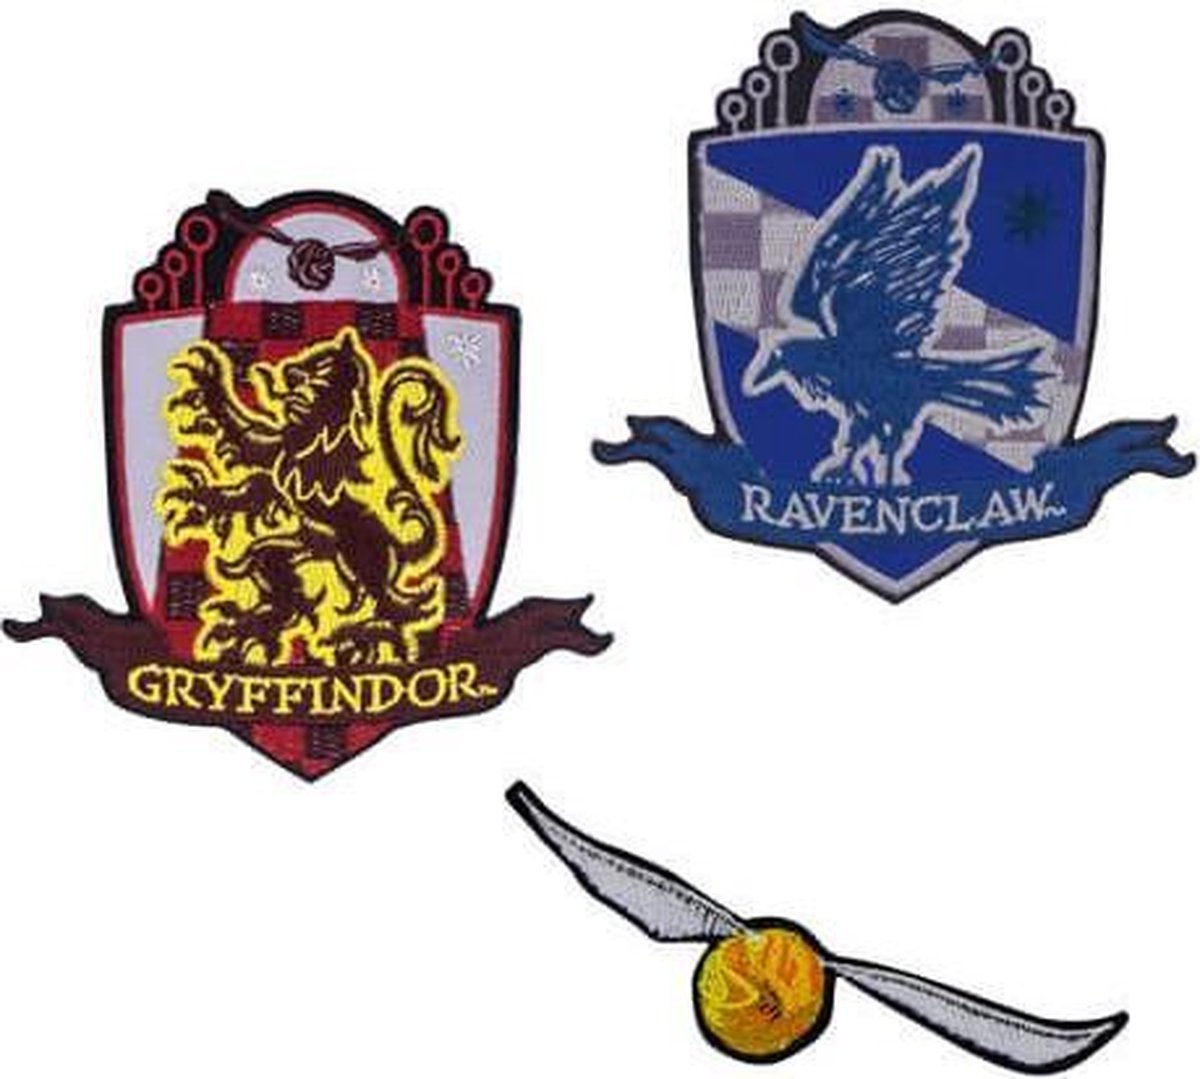 Harry Potter - Golden Snitch Deluxe Patches Set